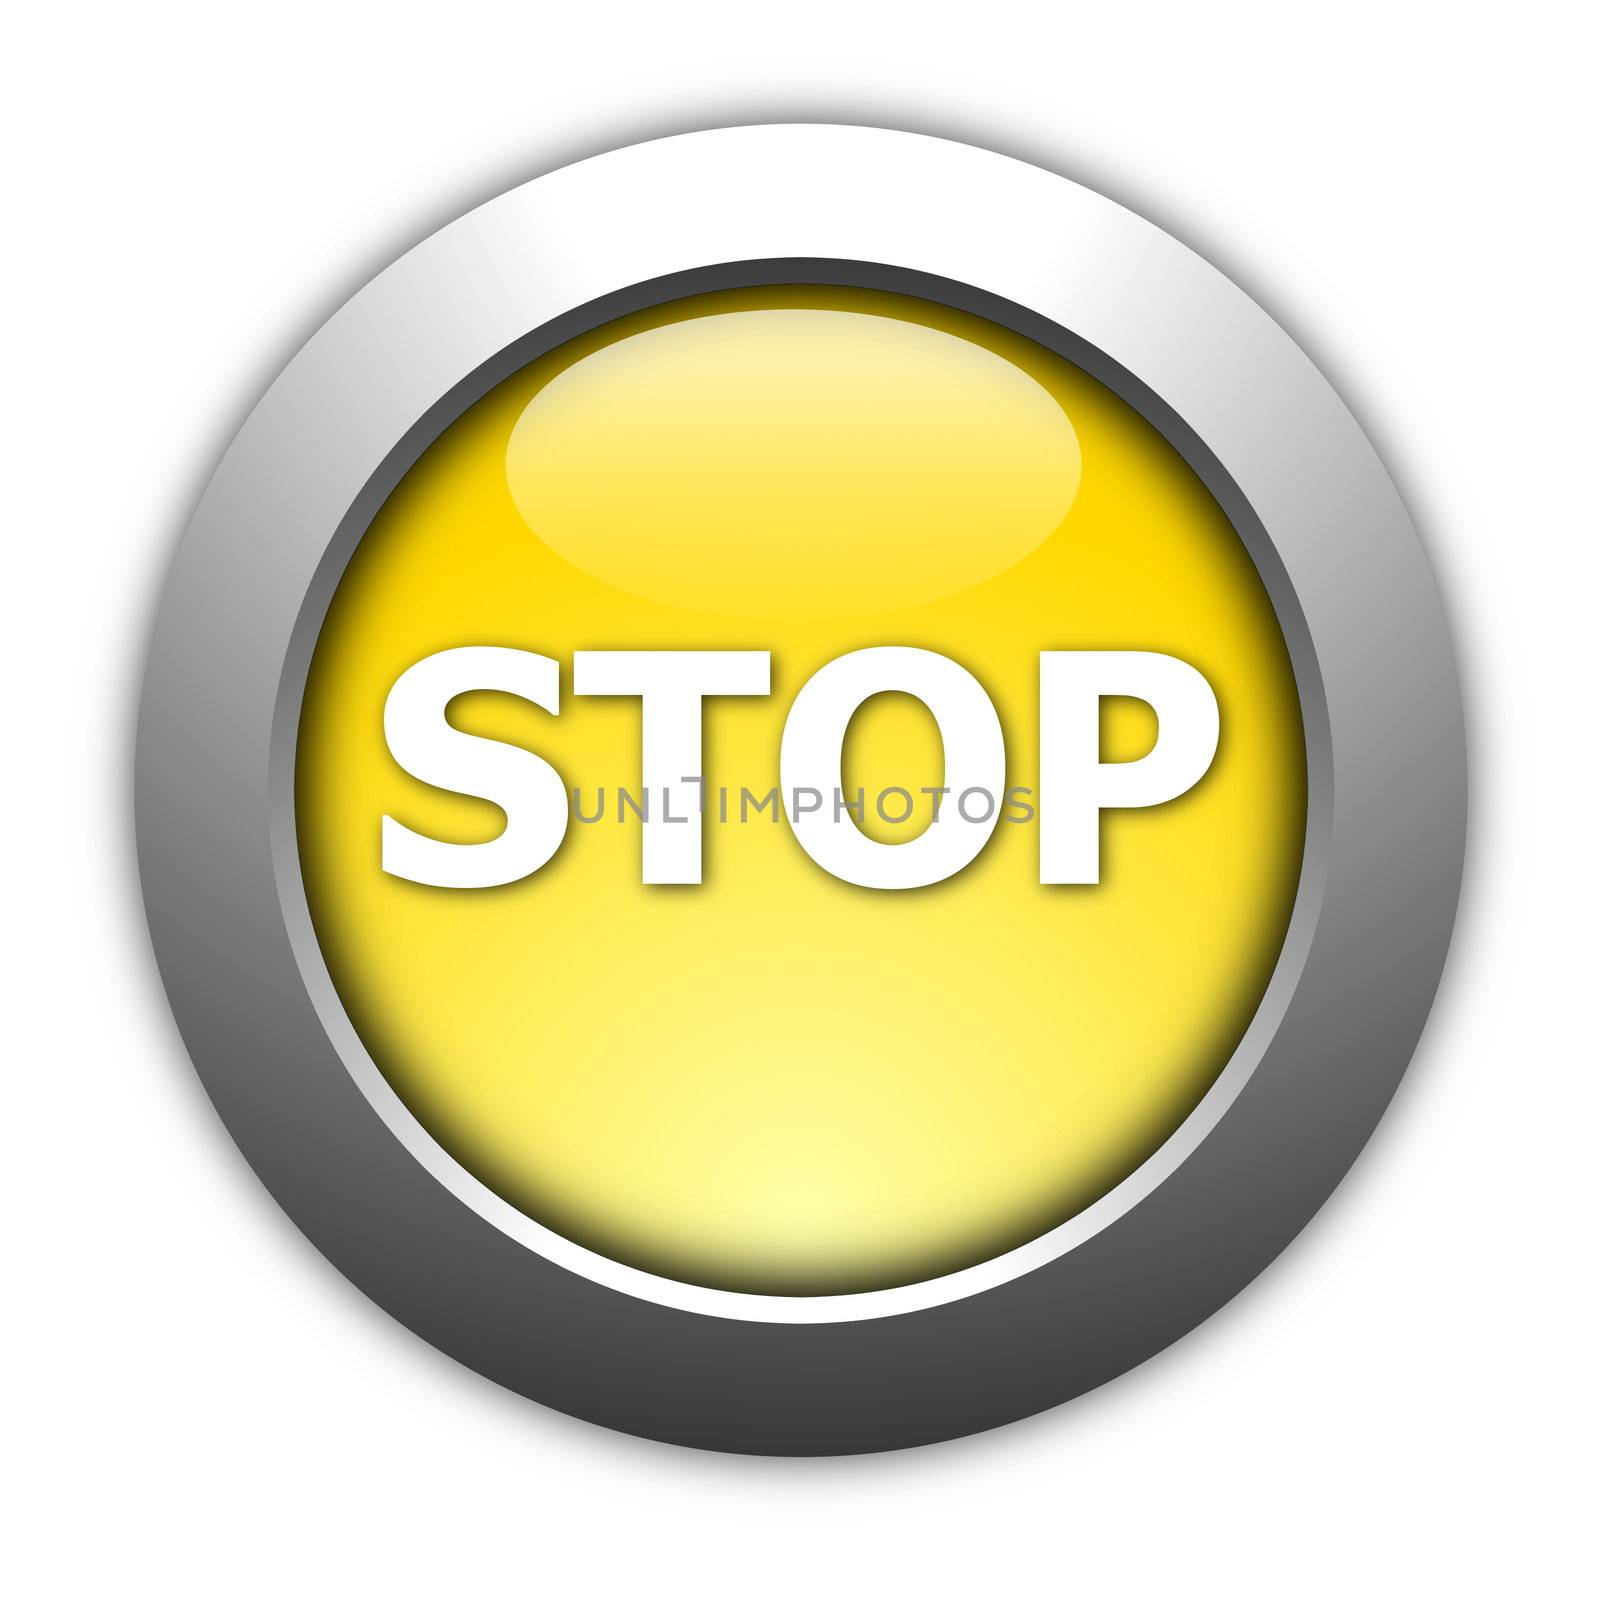 illustration of a stop button on white background